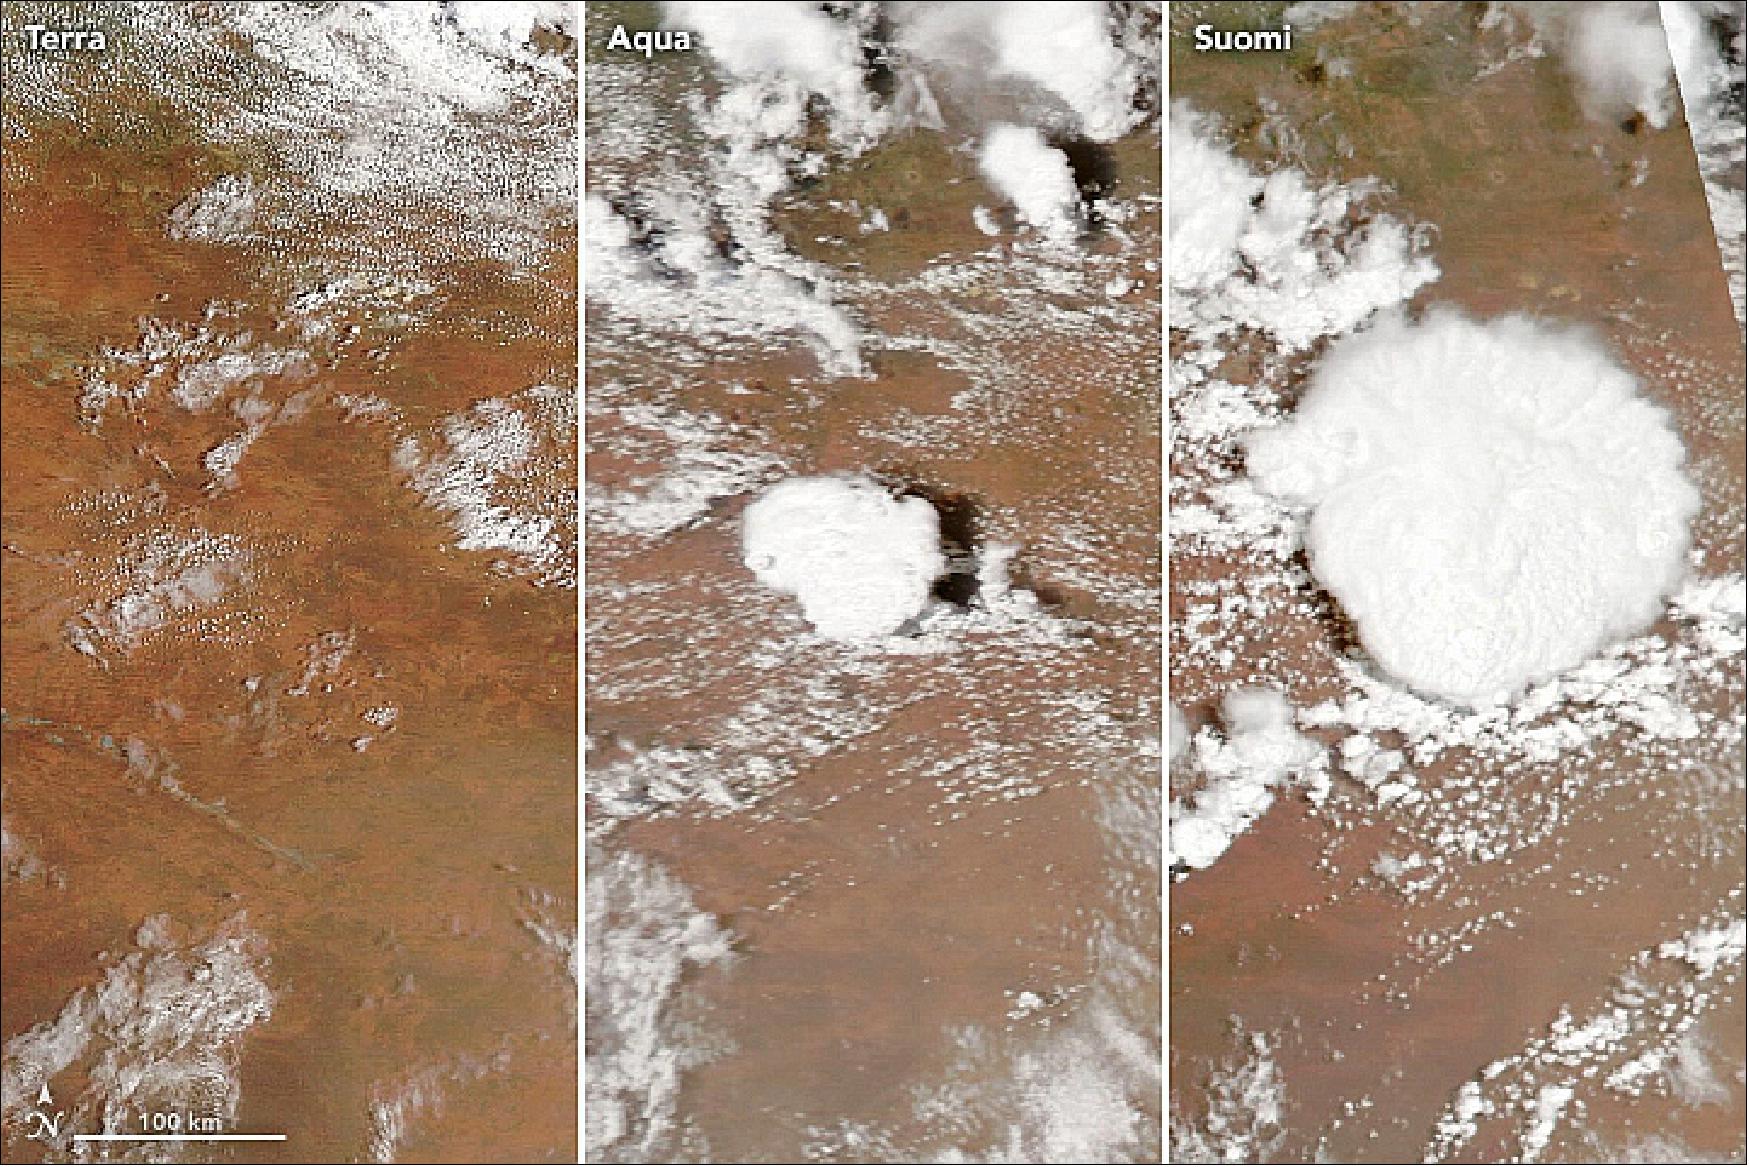 Figure 98: These images show the evolution of a storm over Western Australia on January 14, 2020. Morning skies appear clear in the left image, acquired around 11 a.m. local time. The storm starts growing in the afternoon at about 1 p.m. (middle) and even larger an hour later (right image). The natural-color images were acquired (from left to right) with the Moderate Resolution Imaging Spectroradiometer (MODIS) on NASA's Terra satellite; MODIS on NASA's Aqua satellite, and the Visible Infrared Imaging Radiometer Suite (VIIRS) on the NOAA-NASA Suomi NPP satellite (image credit: NASA Earth Observatory image by Lauren Dauphin, using MODIS data from NASA EOSDIS/LANCE and GIBS/Worldview and VIIRS data from NASA EOSDIS/LANCE and GIBS/Worldview and the Suomi National Polar-orbiting Partnership. Story by Kathryn Hansen)